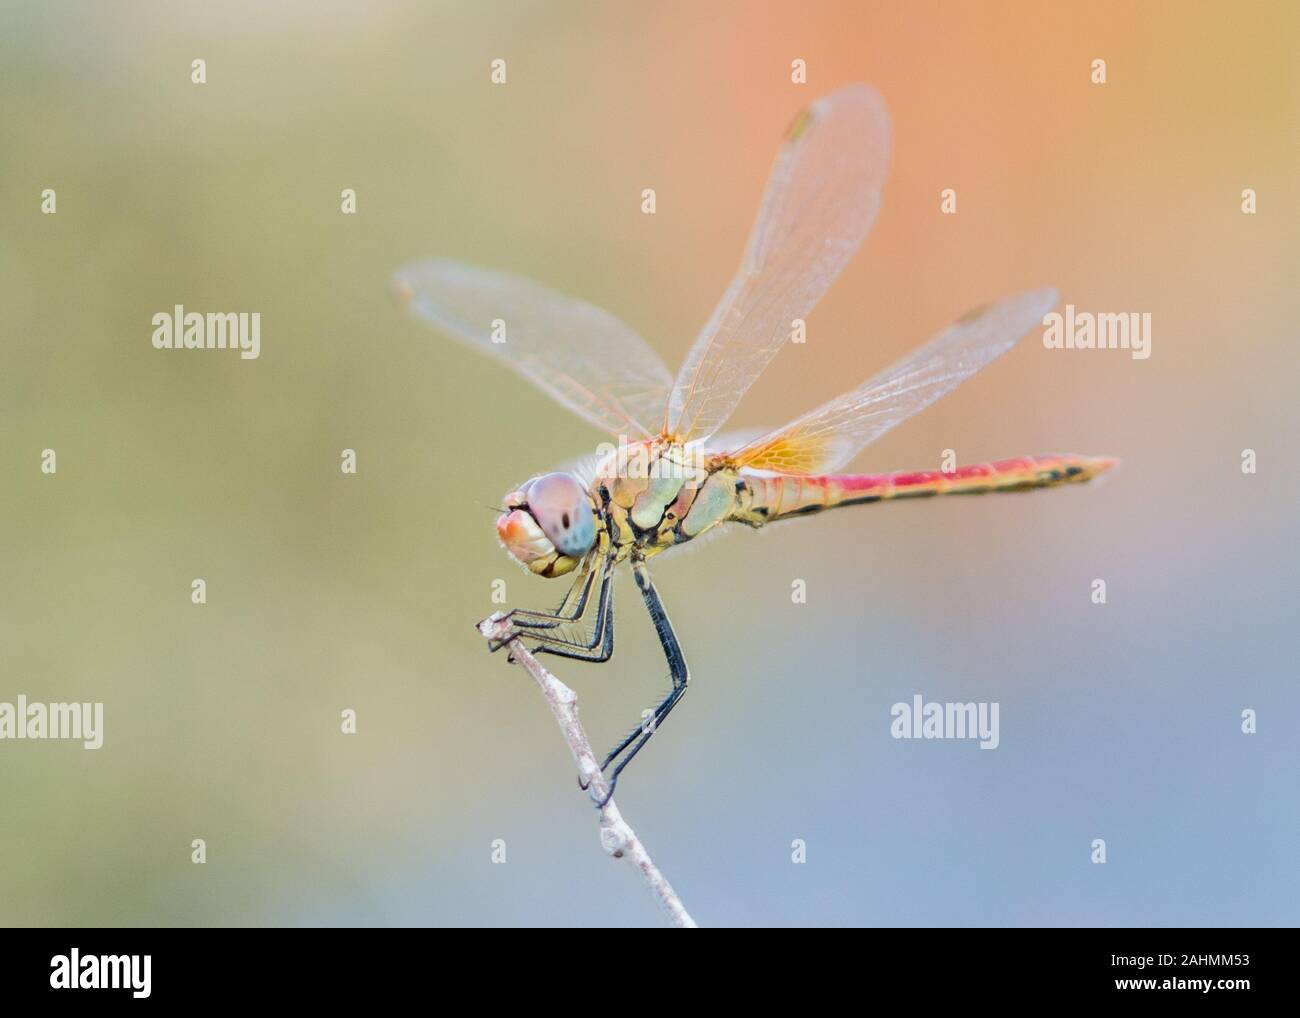 fine art photography of a common darter dragonfly rests on a twig on Crete Greece Stock Photo